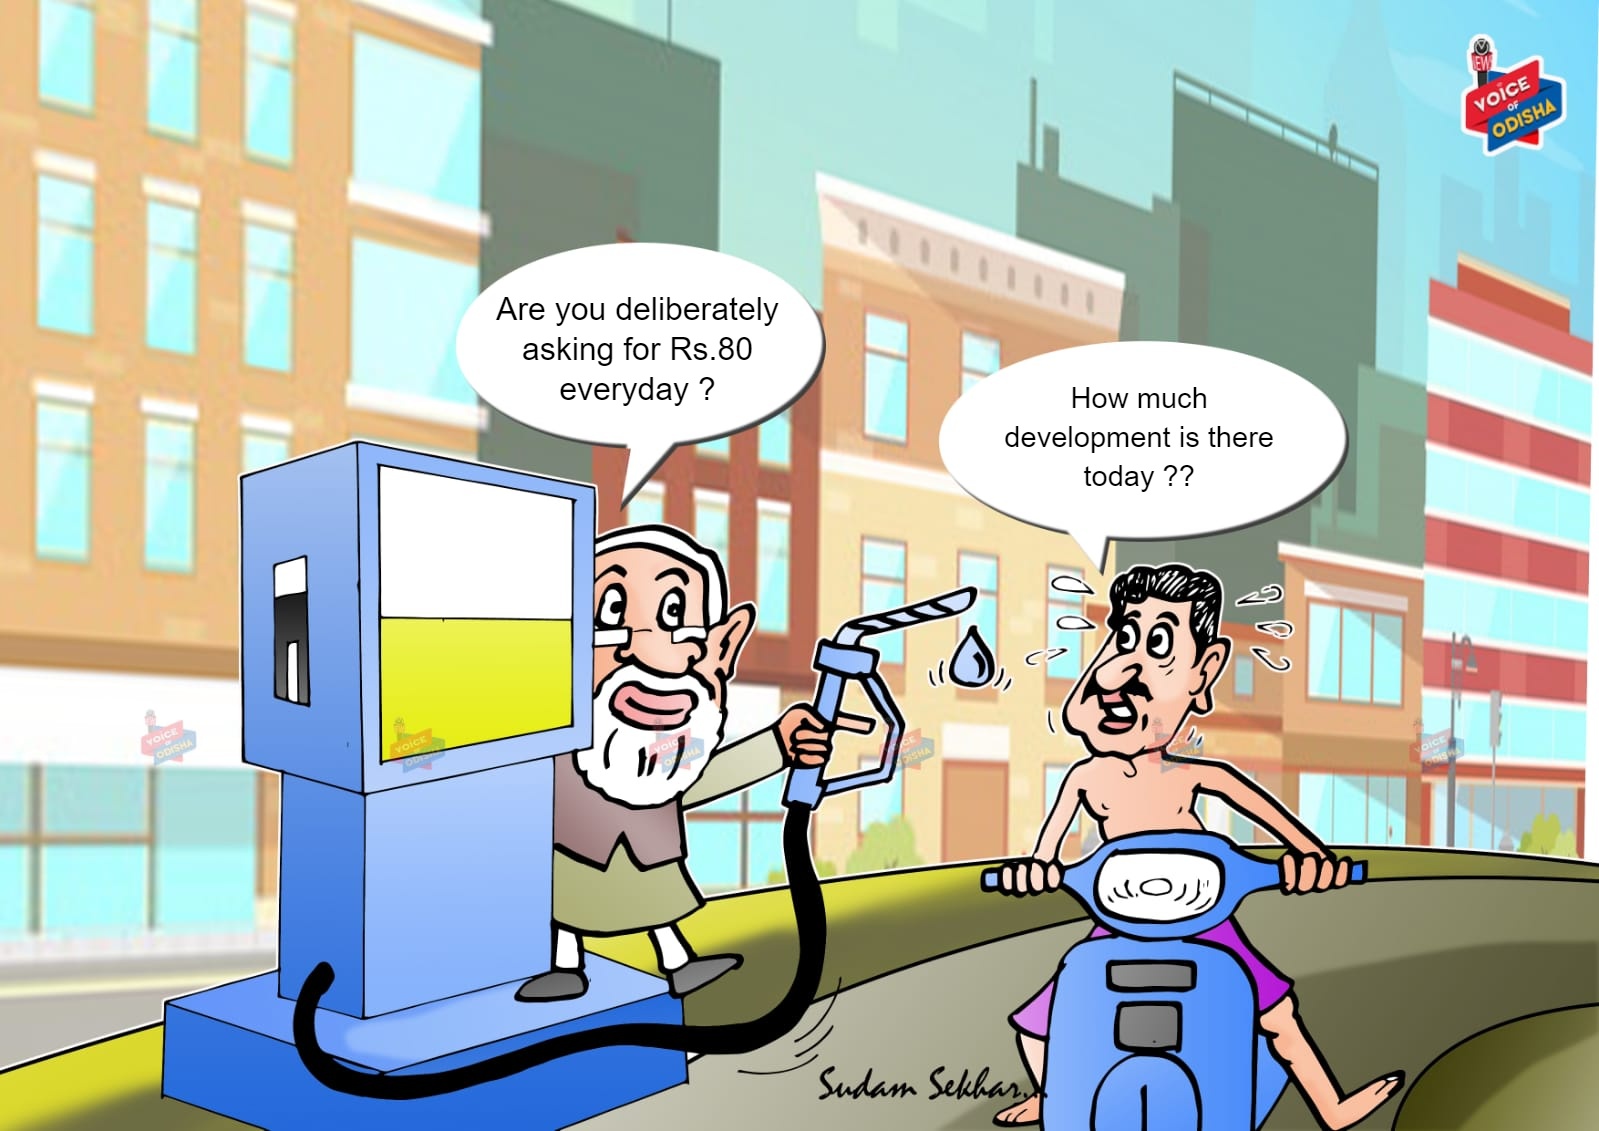 Hike in petrol and diesel prices cartoon , Voice Of Odisha, oil prices,  India, petrol, diesel, cartoon , Odisha News | Odia News | Odisha polities  | Odisha Issue | Odisha Temple |